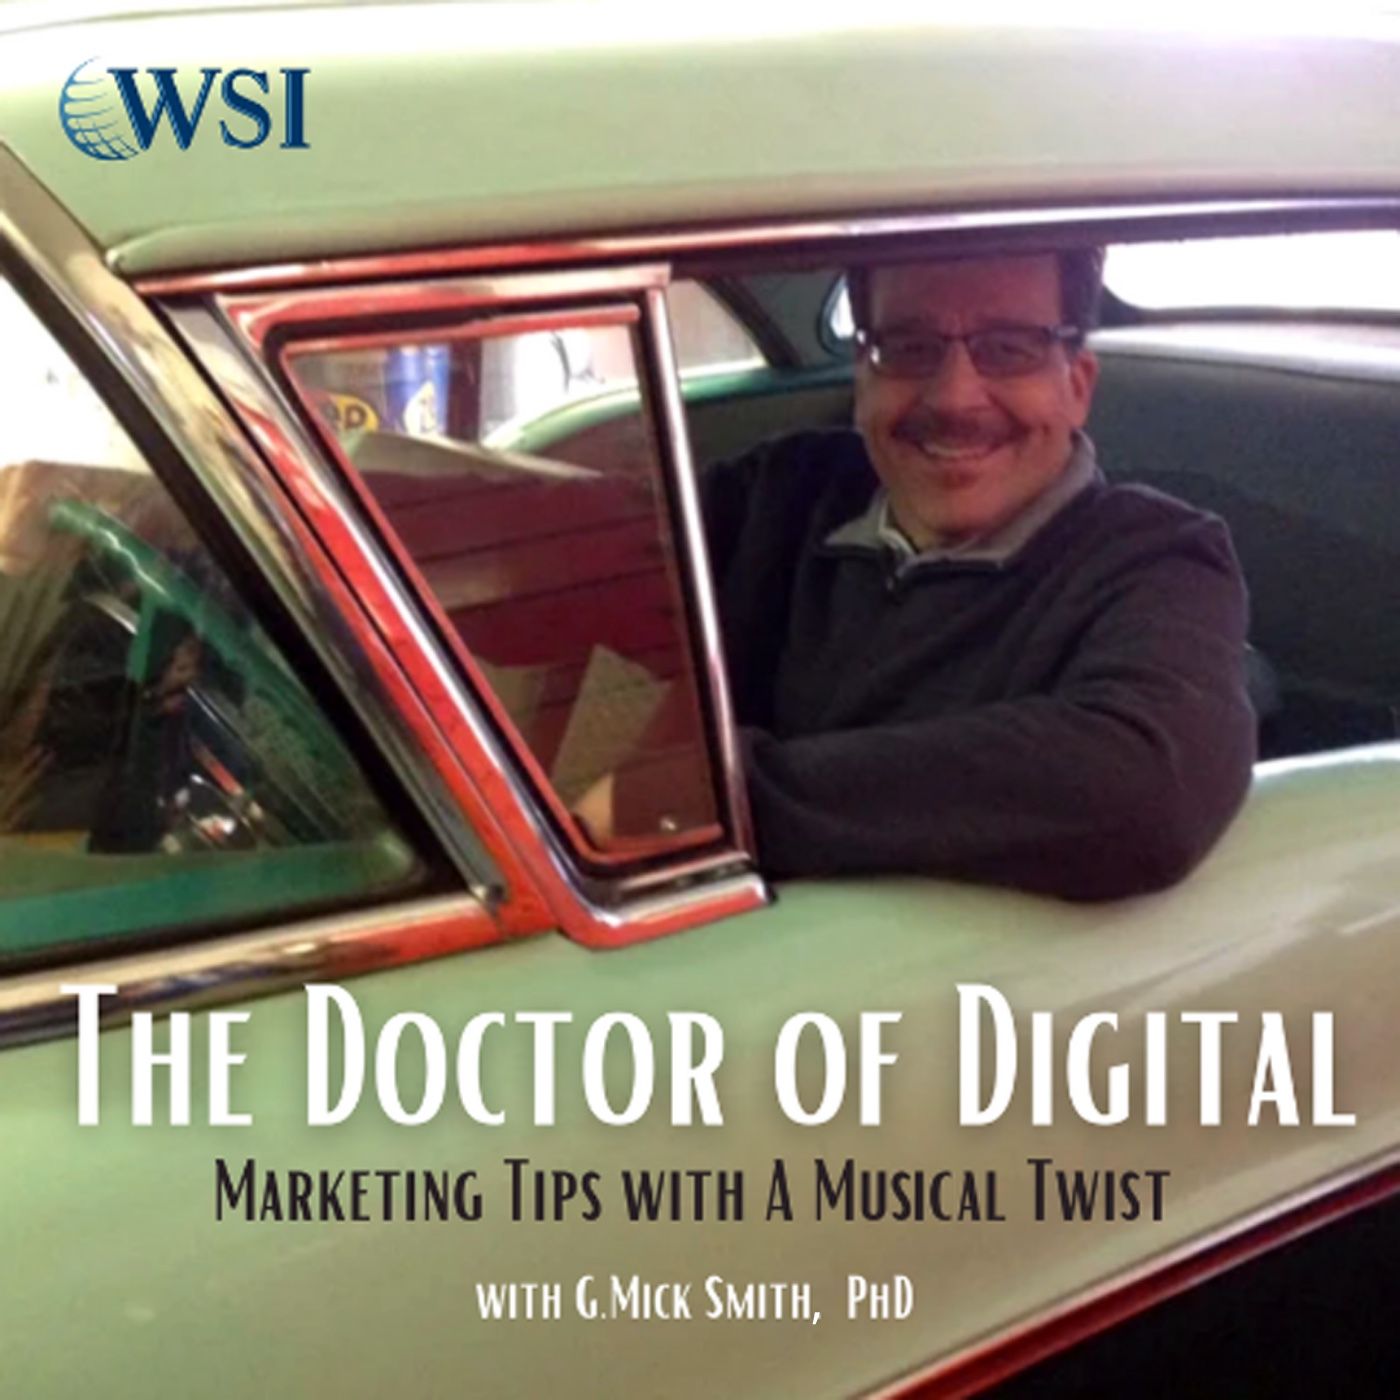 How Do I Recruit Top Candidates? Simon Lader Interview Episode #CCLXIII The Doctor of Digital™ GMick Smith, PhD